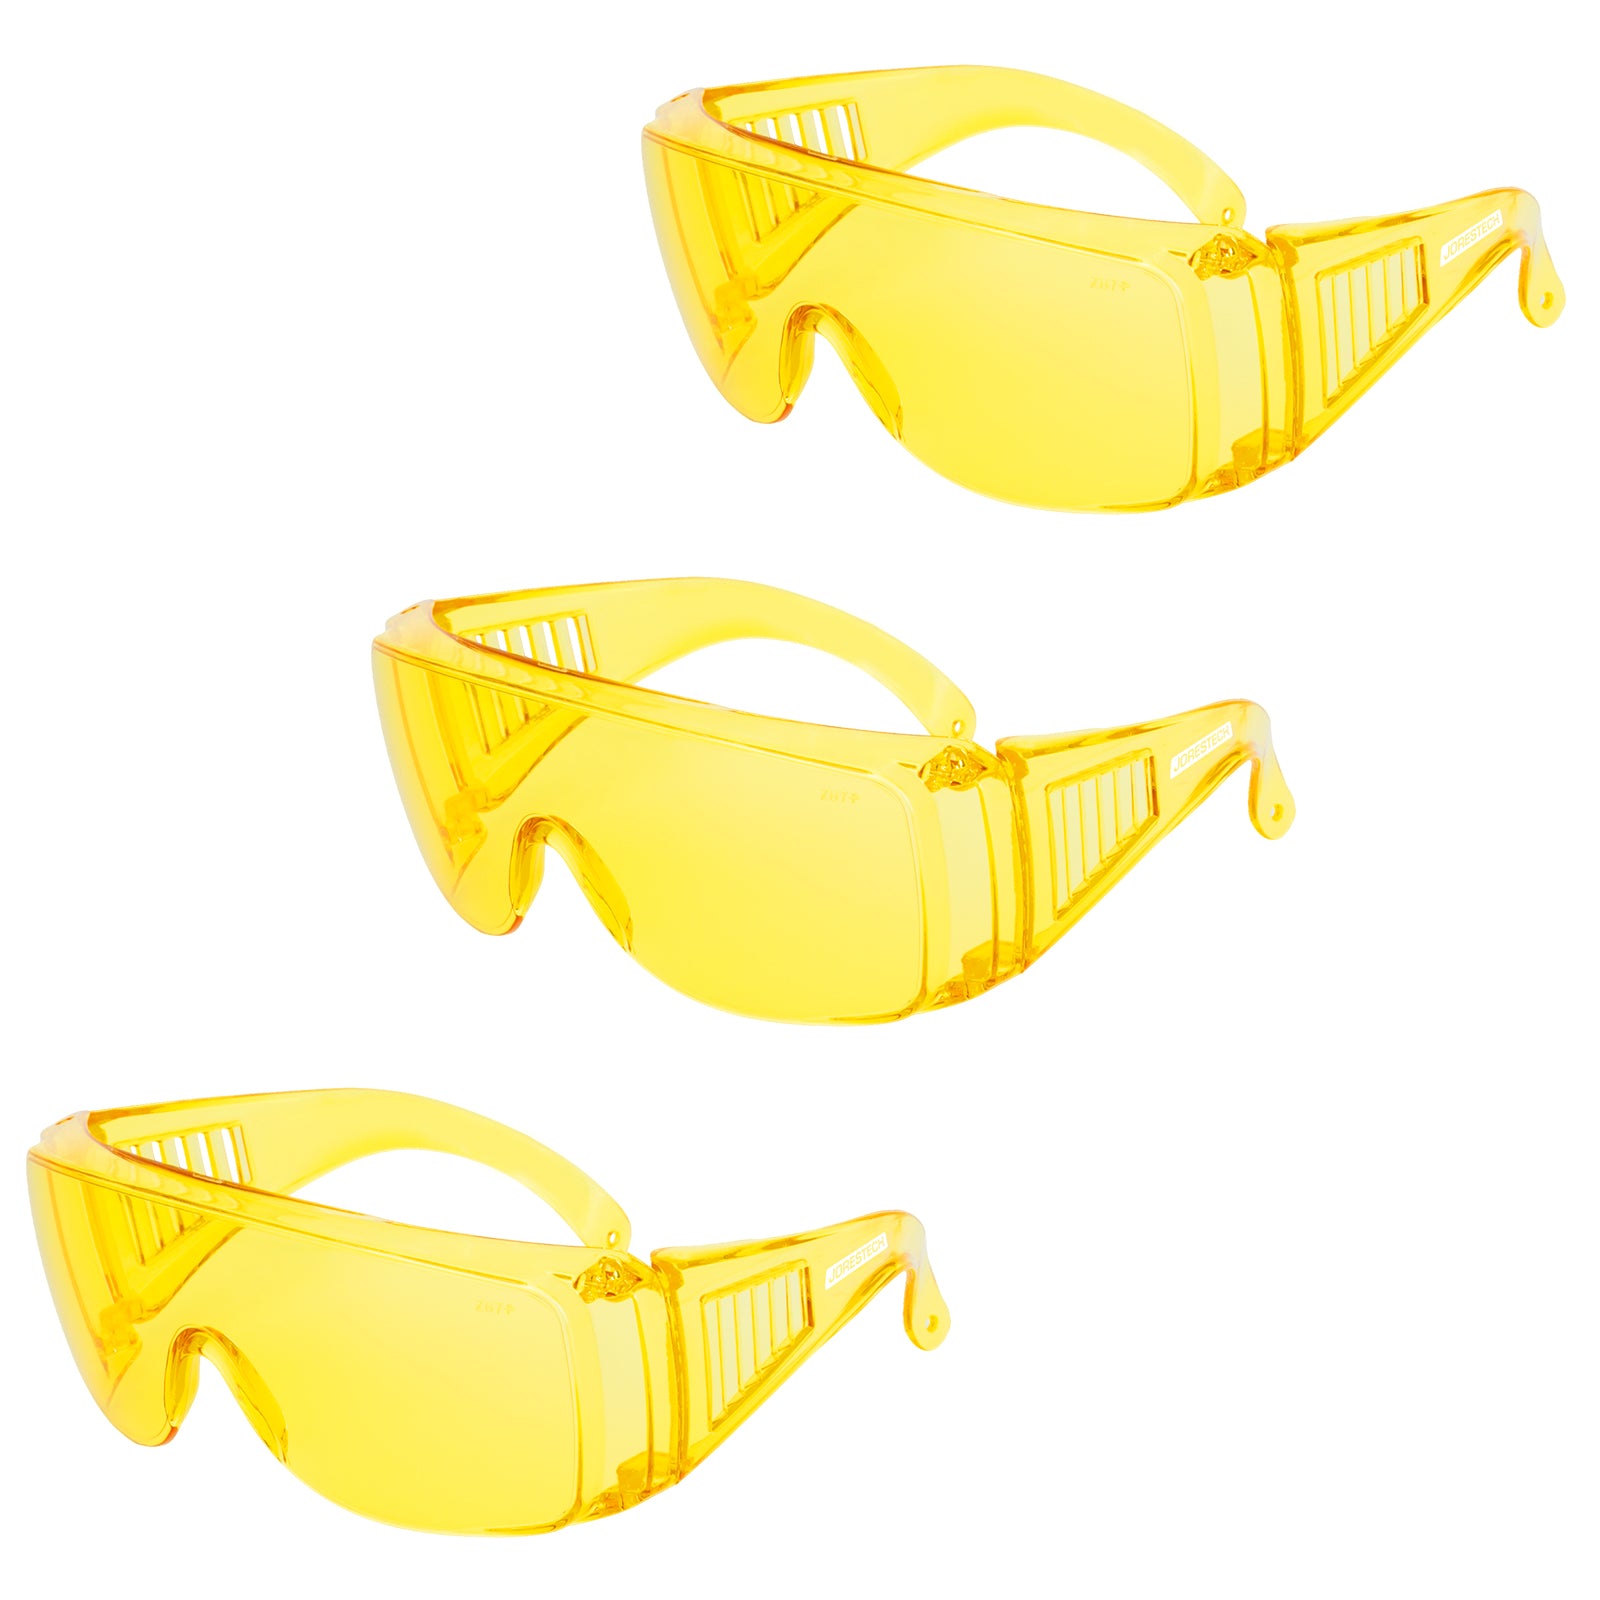 Lazer Face z87 Yellow Tint Safety Glasses